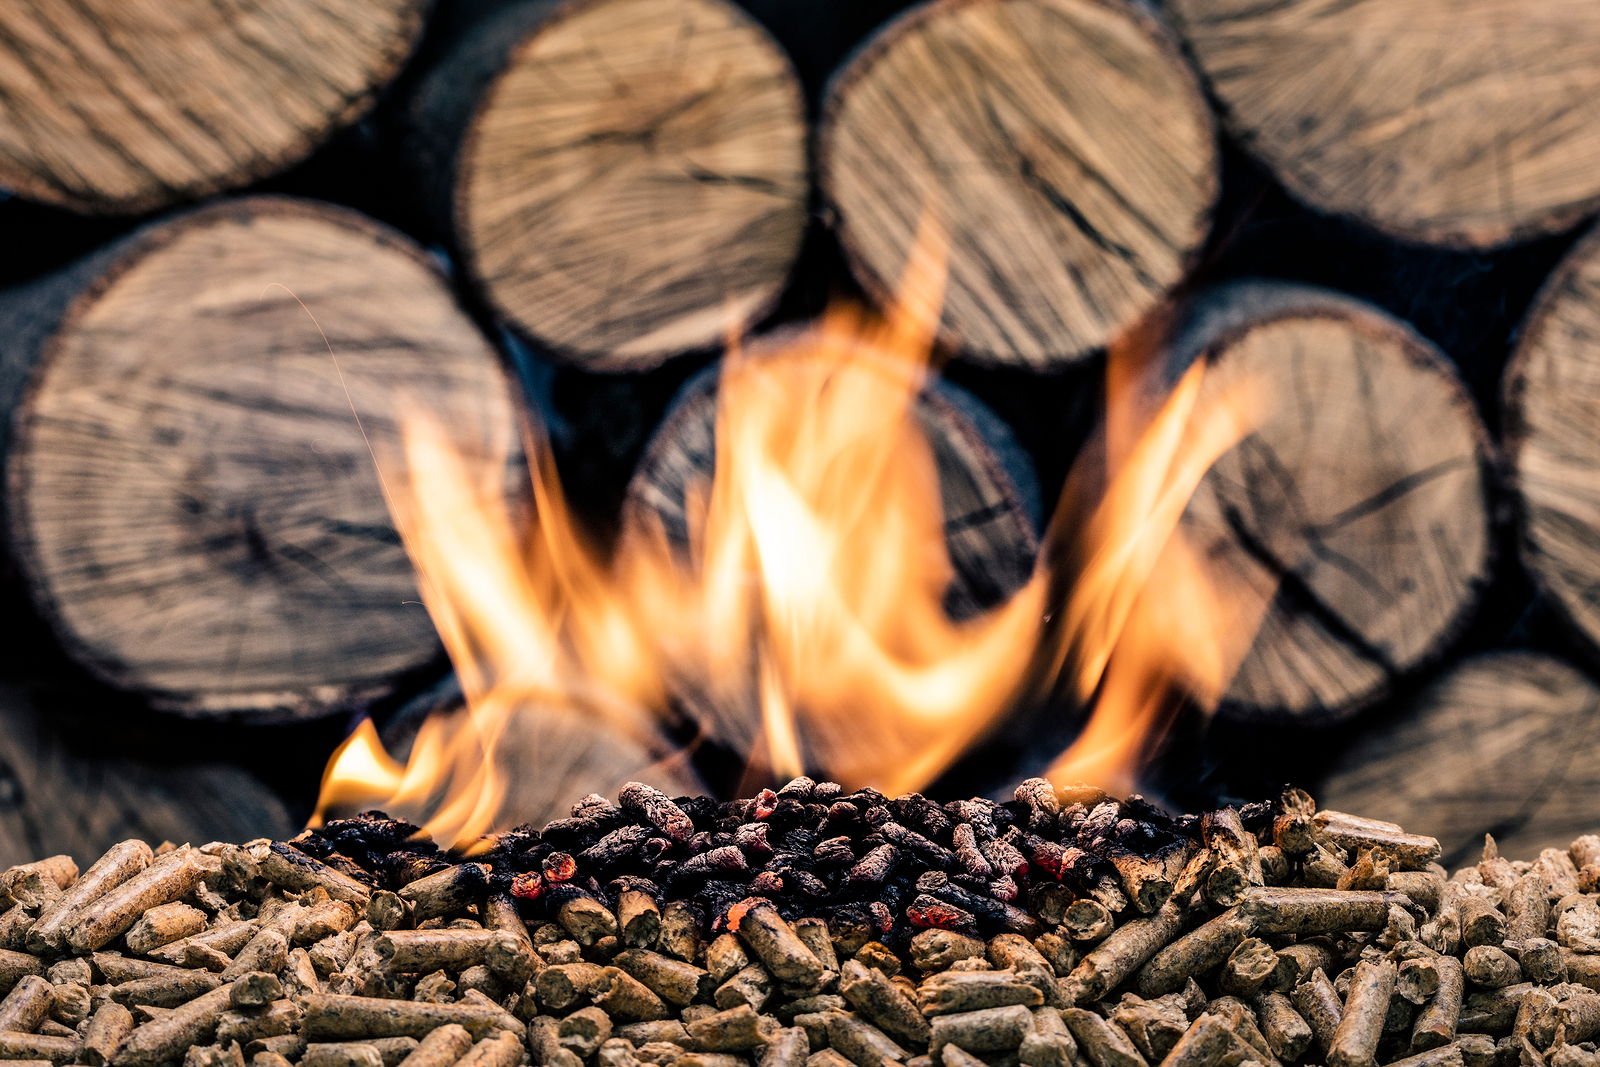 Pinnacle To Build New Industrial Wood Pellet Facility In Us Bioenergy Insight Magazine